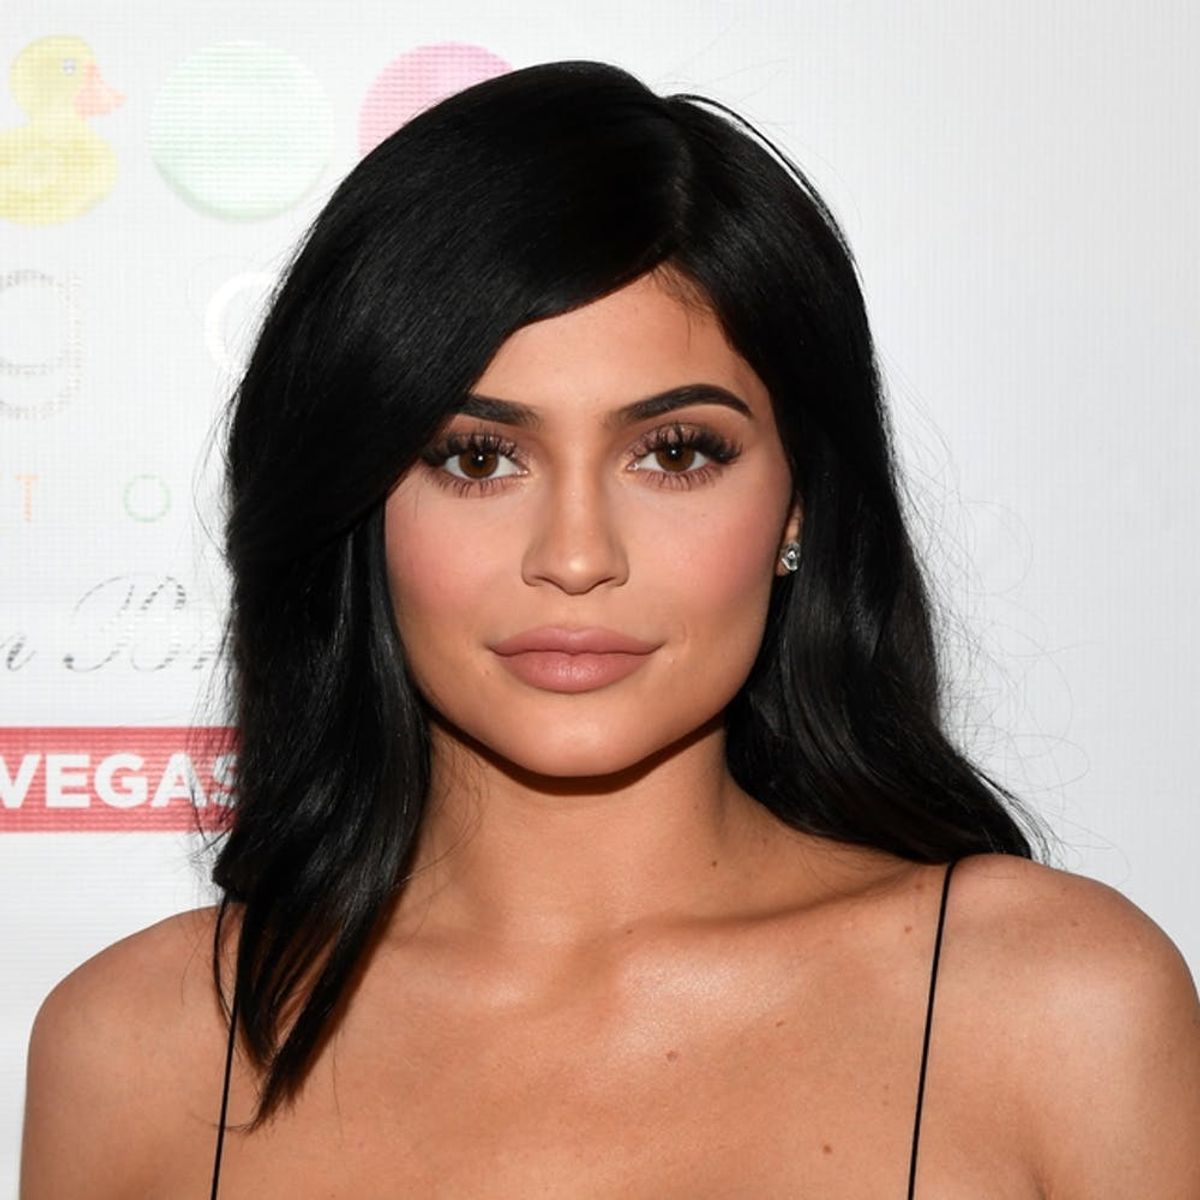 Kylie Jenner Looks Unrecognizable With a Pixie Haircut